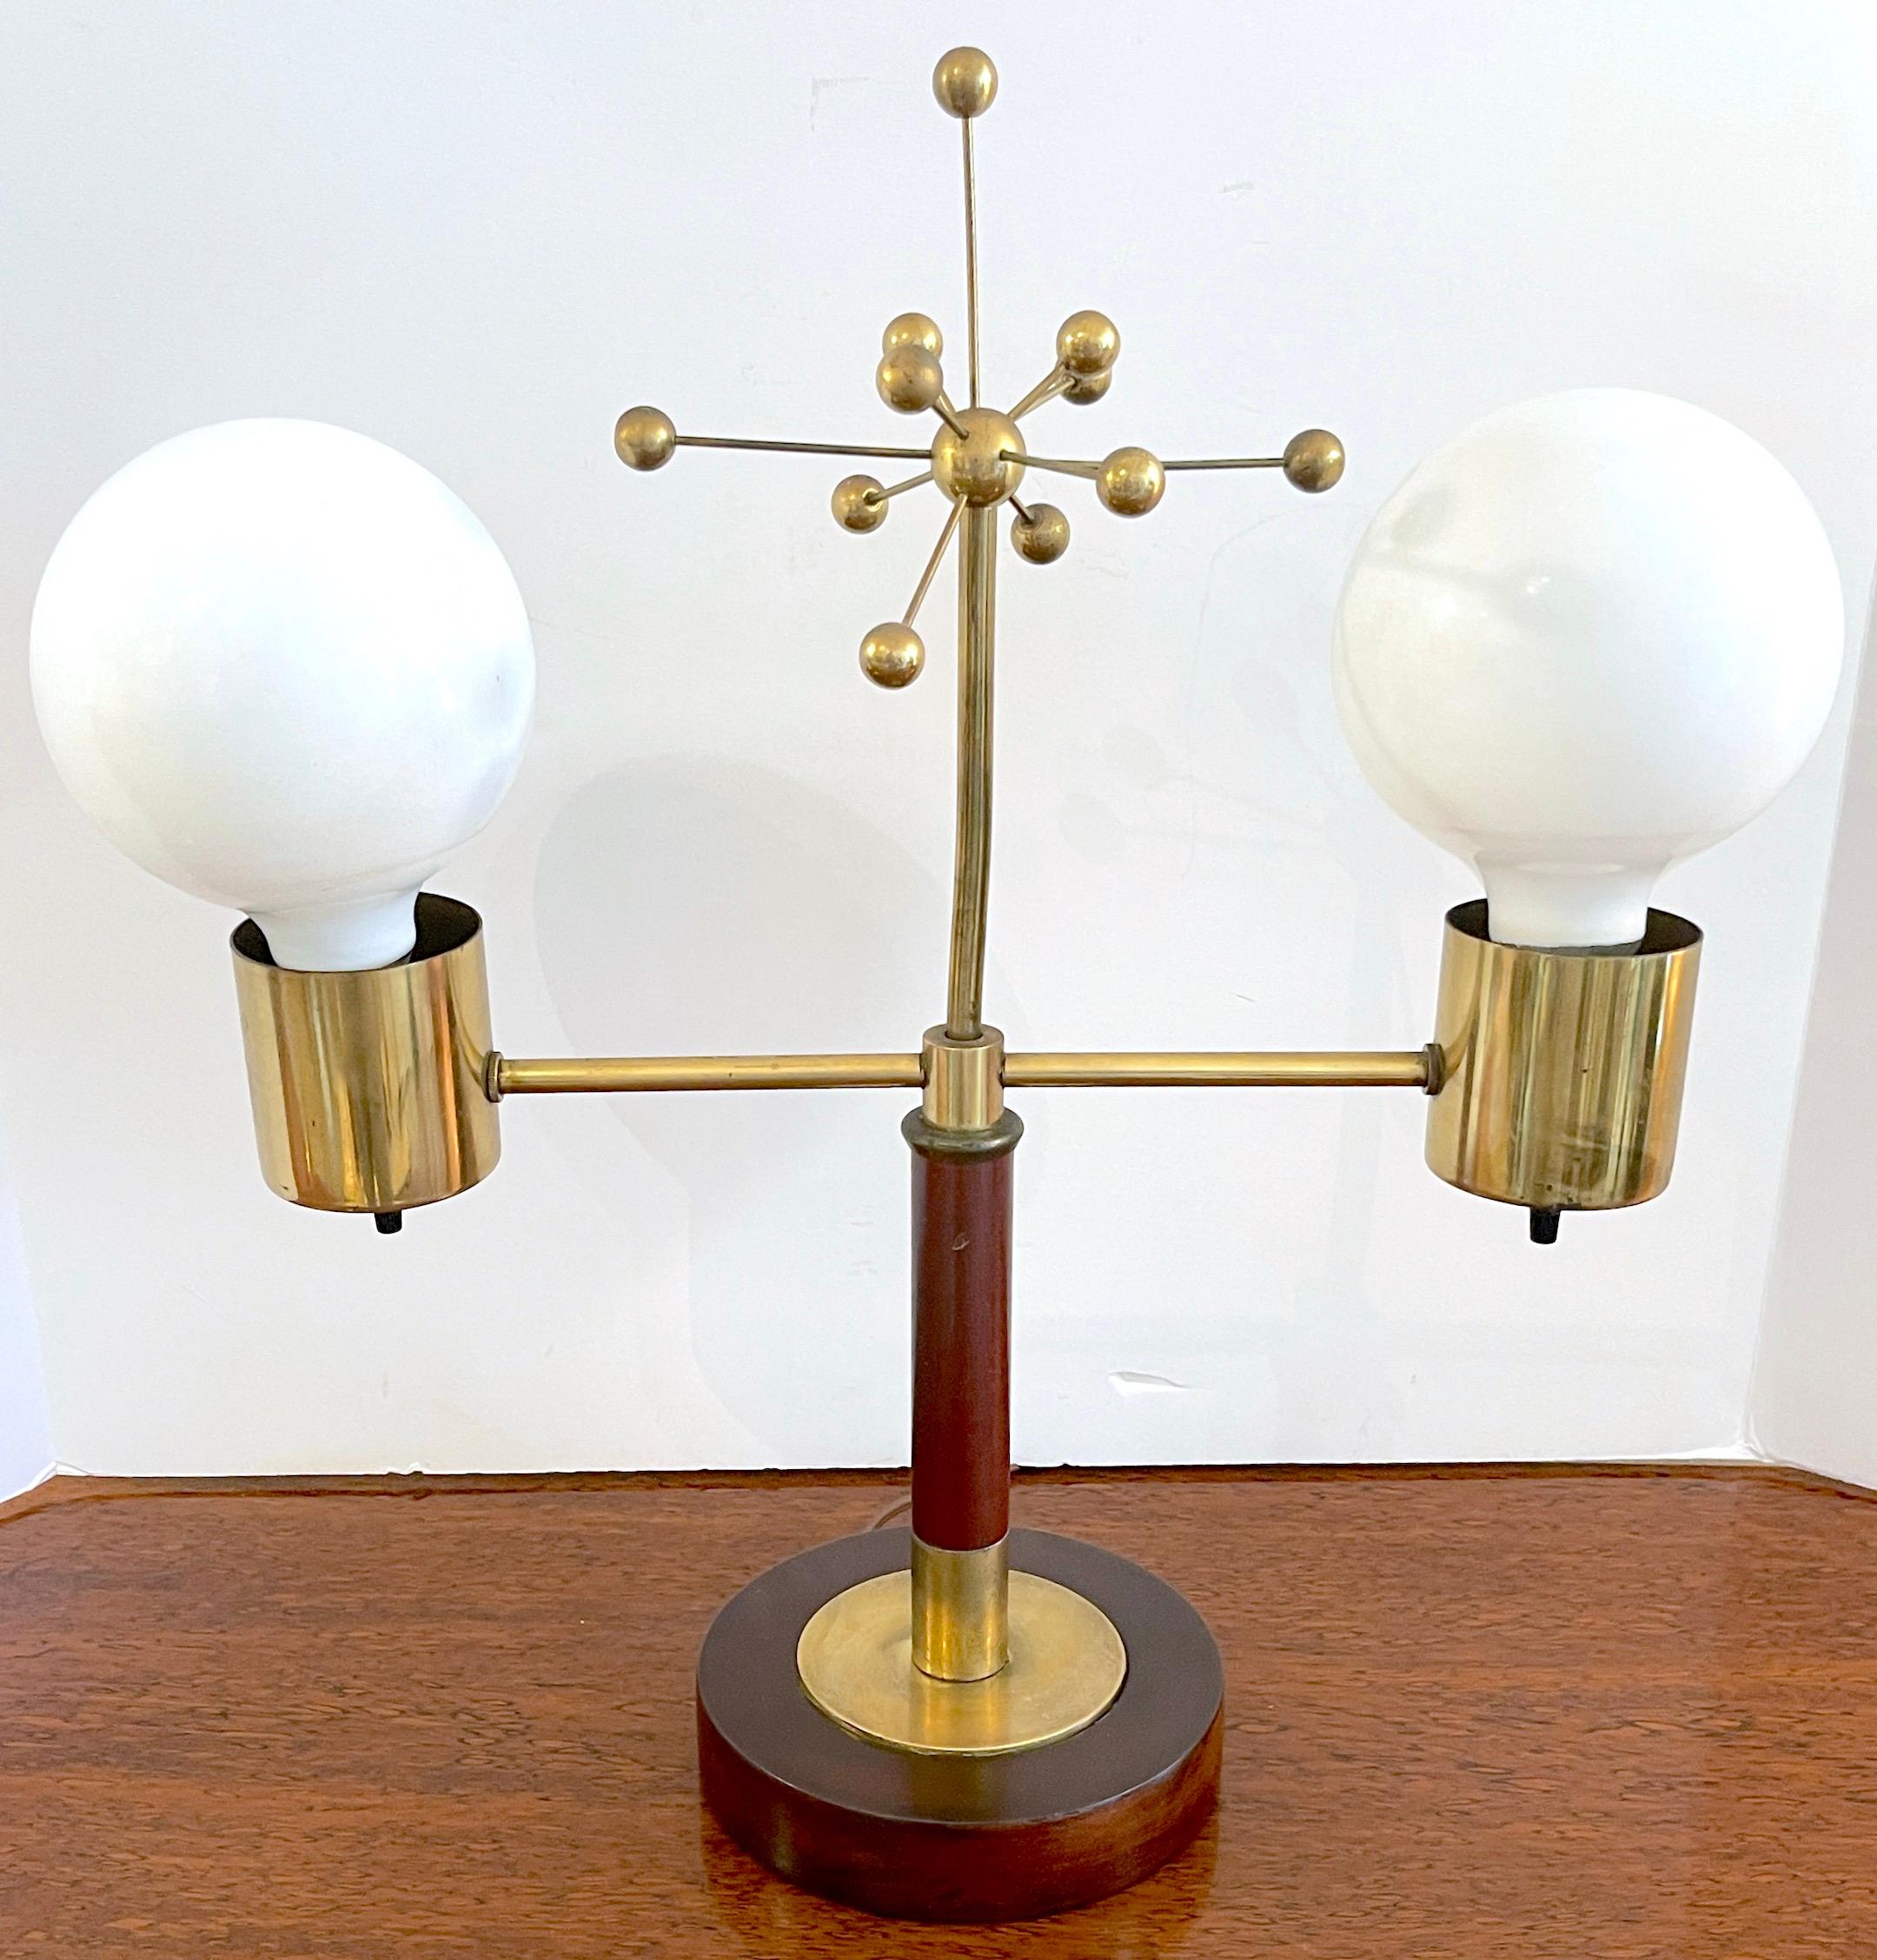 Italian mid century brass & wood 'Atomic' lamp 
Italy, 1950s
A unique mid-century lamp, the lamp with a center brass sculpture (Six inch high x 7-inch diameter of a 'Atom Vector' fitted with two straight brass arms. Each arm with a brass electrified